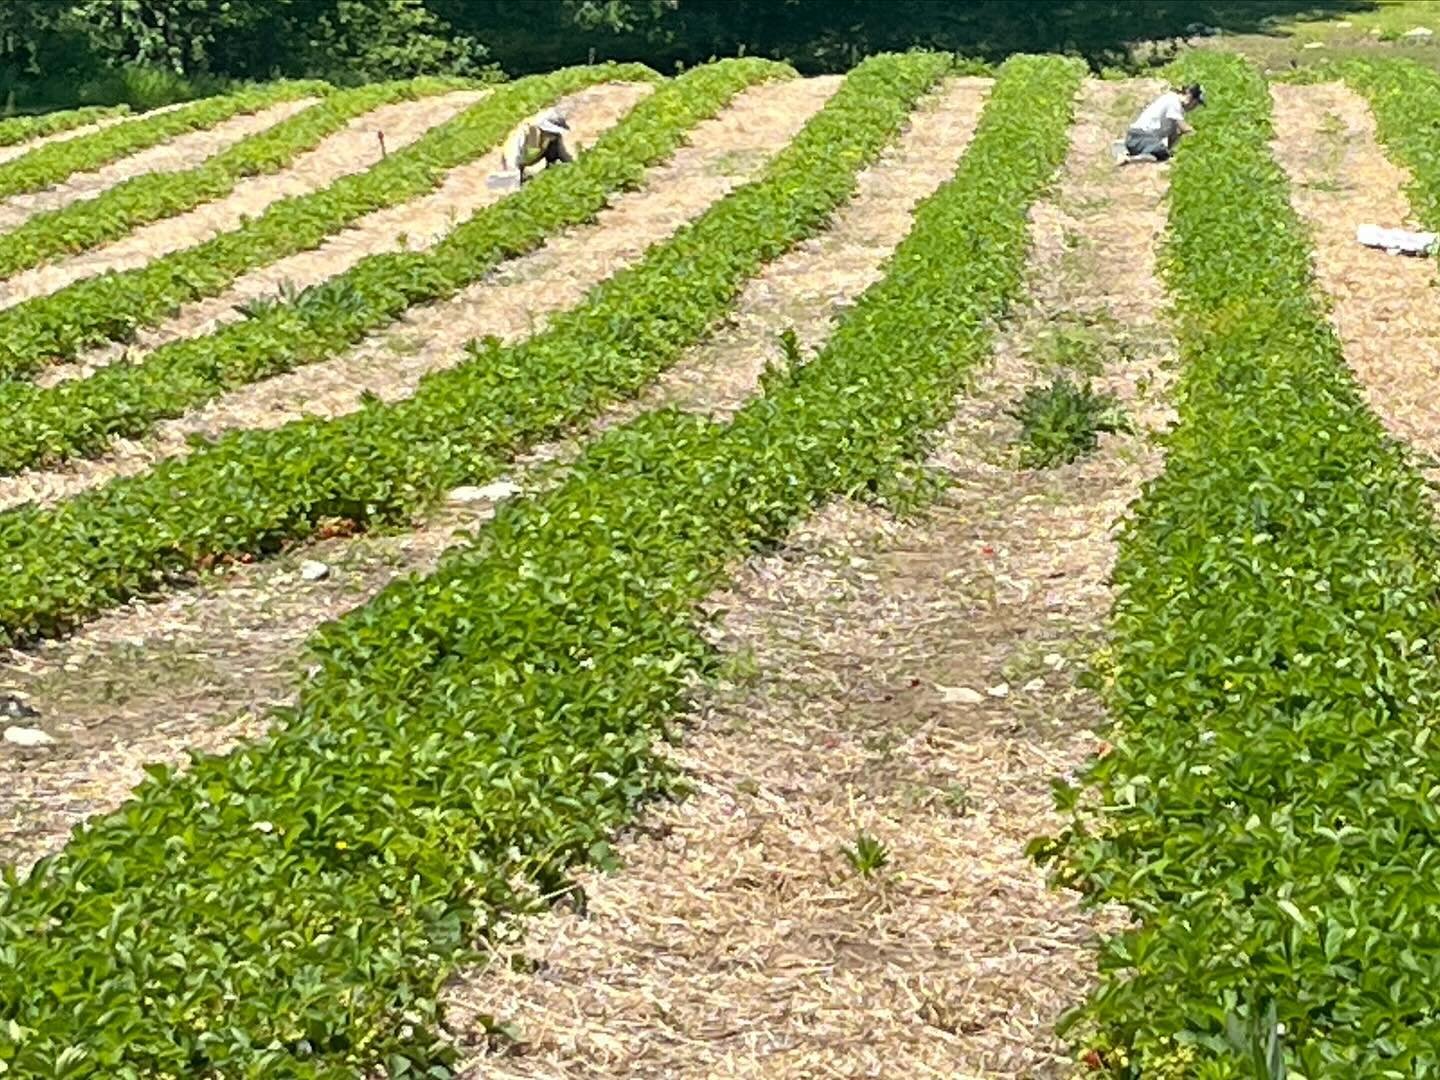 One month we will be harvesting strawberries. Yum. New England berries are smaller but sweeter than California berries. Come out and pick your own and listen to the birds while you pick. It&rsquo;s a whole different experience than going to the groce